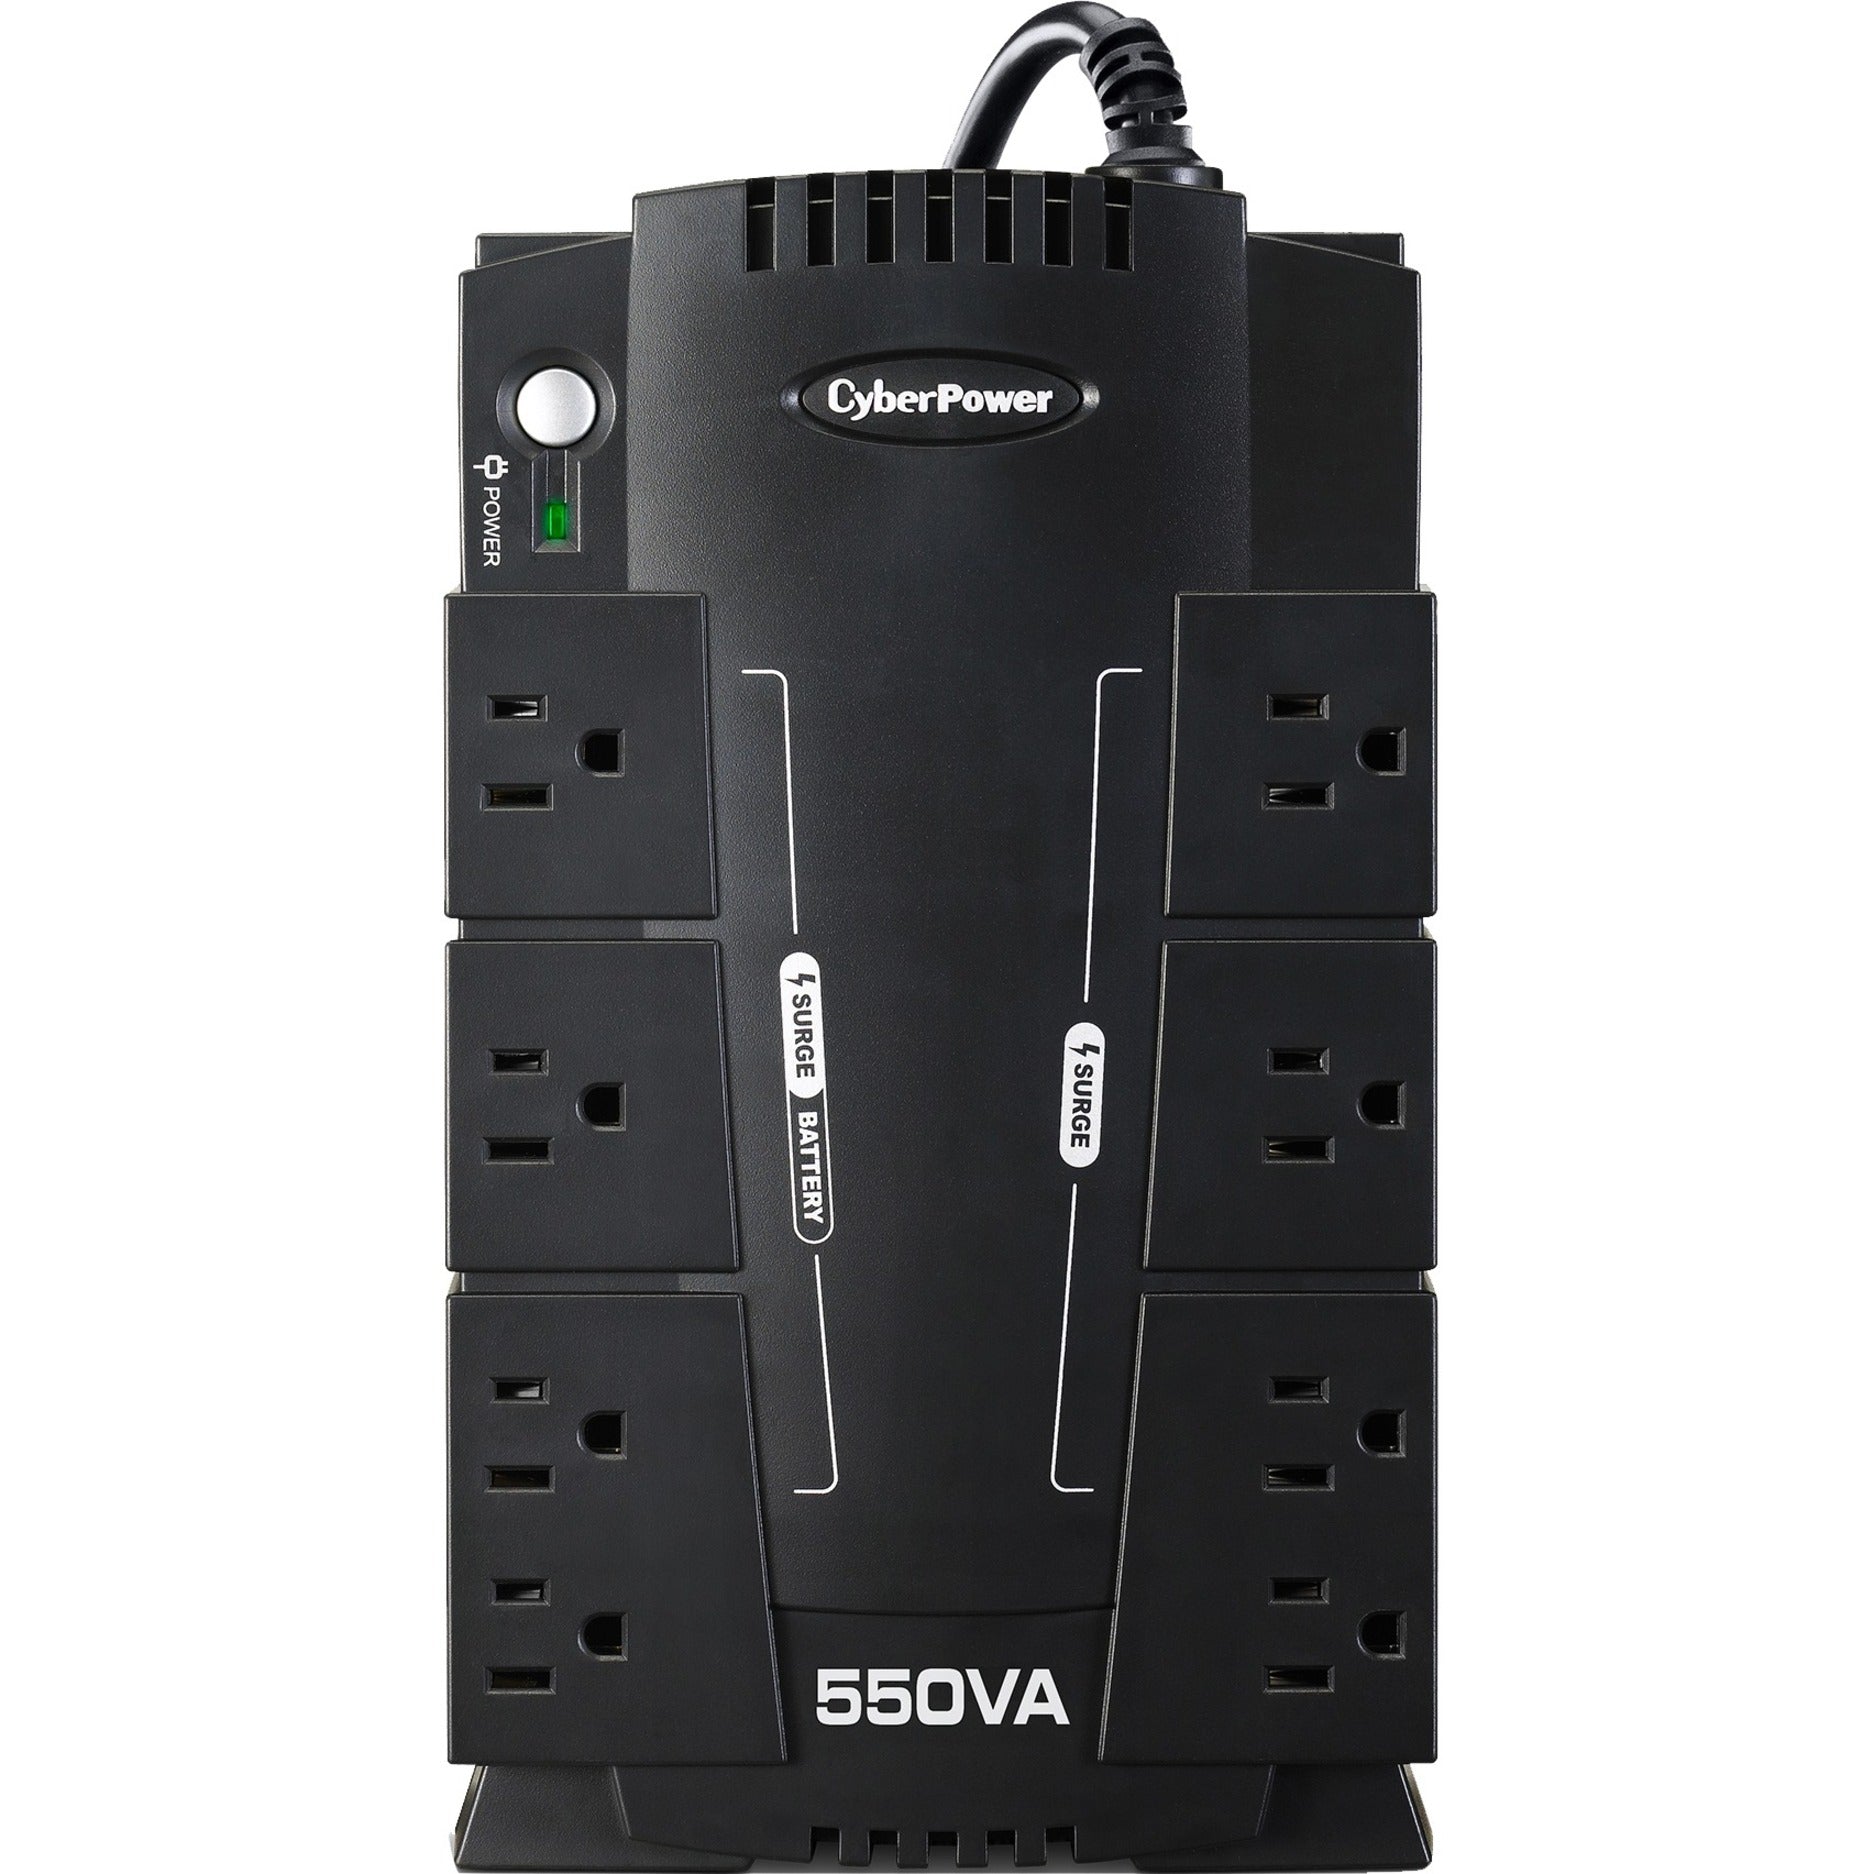 CyberPower CP550SLG Standby UPS 550 VA Desktop Power Backup 2 Minute Full Load Backup Energy Efficient